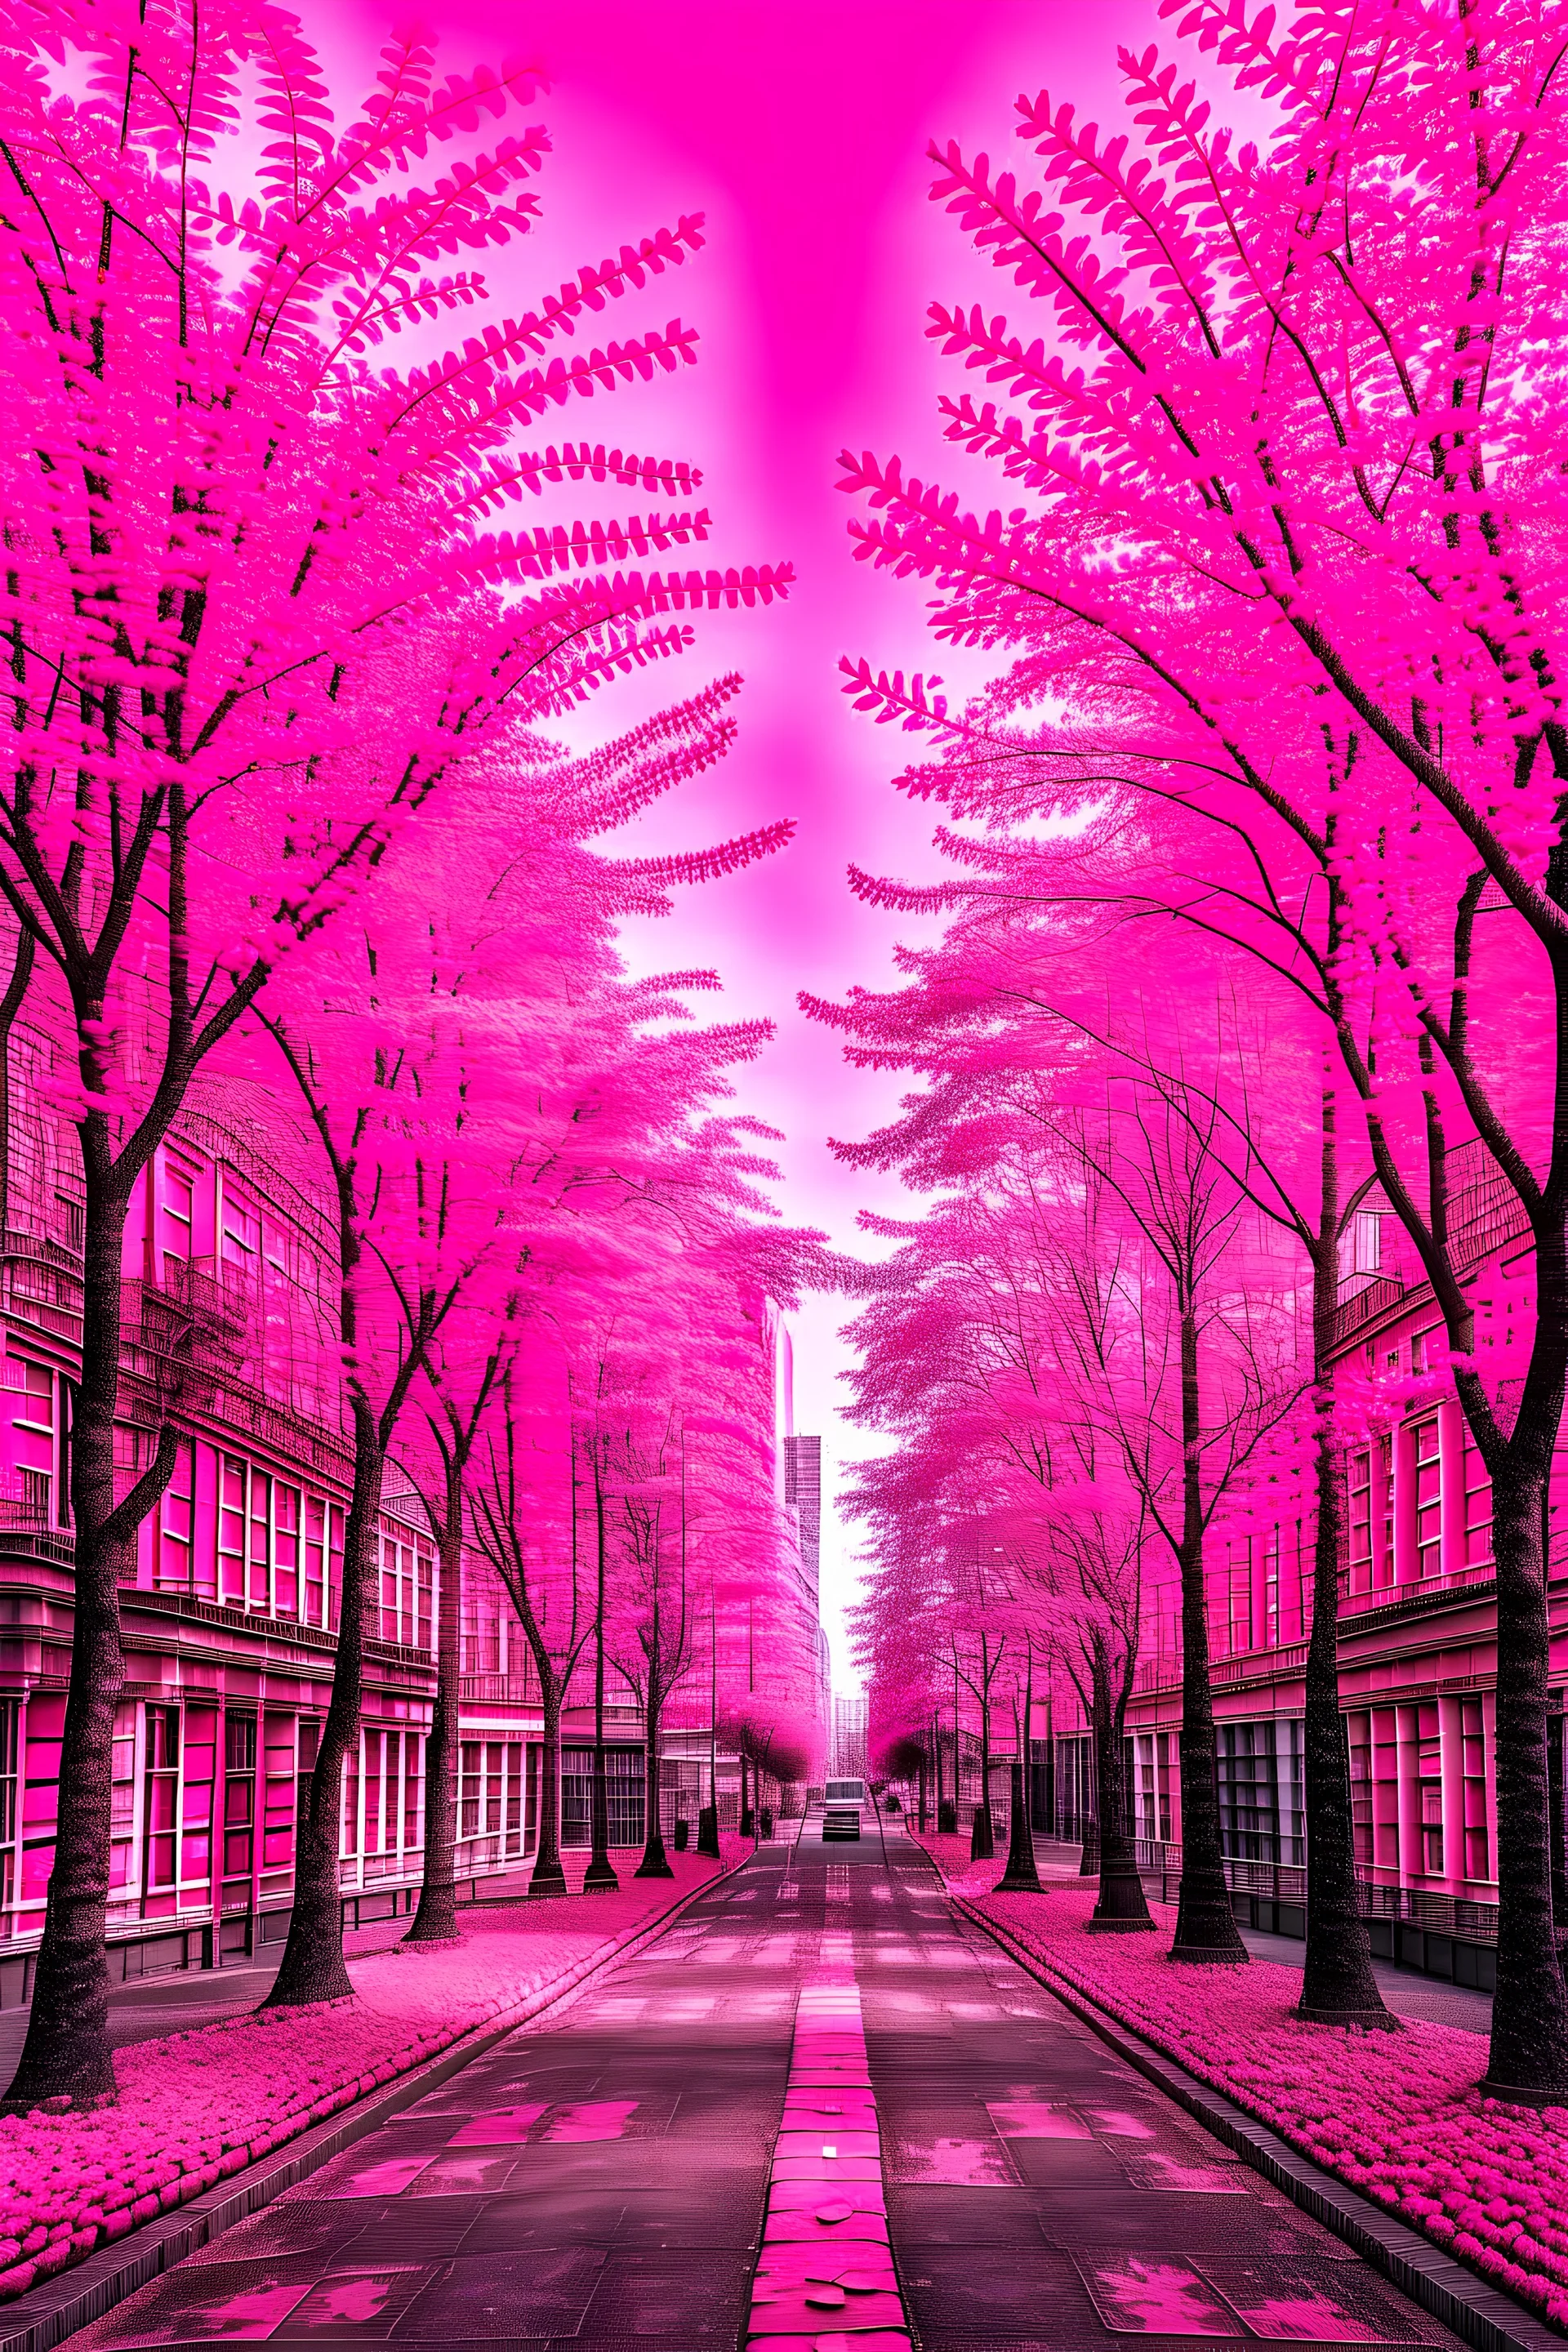 Ultra-realistic photo of trees with pink leaves in a city